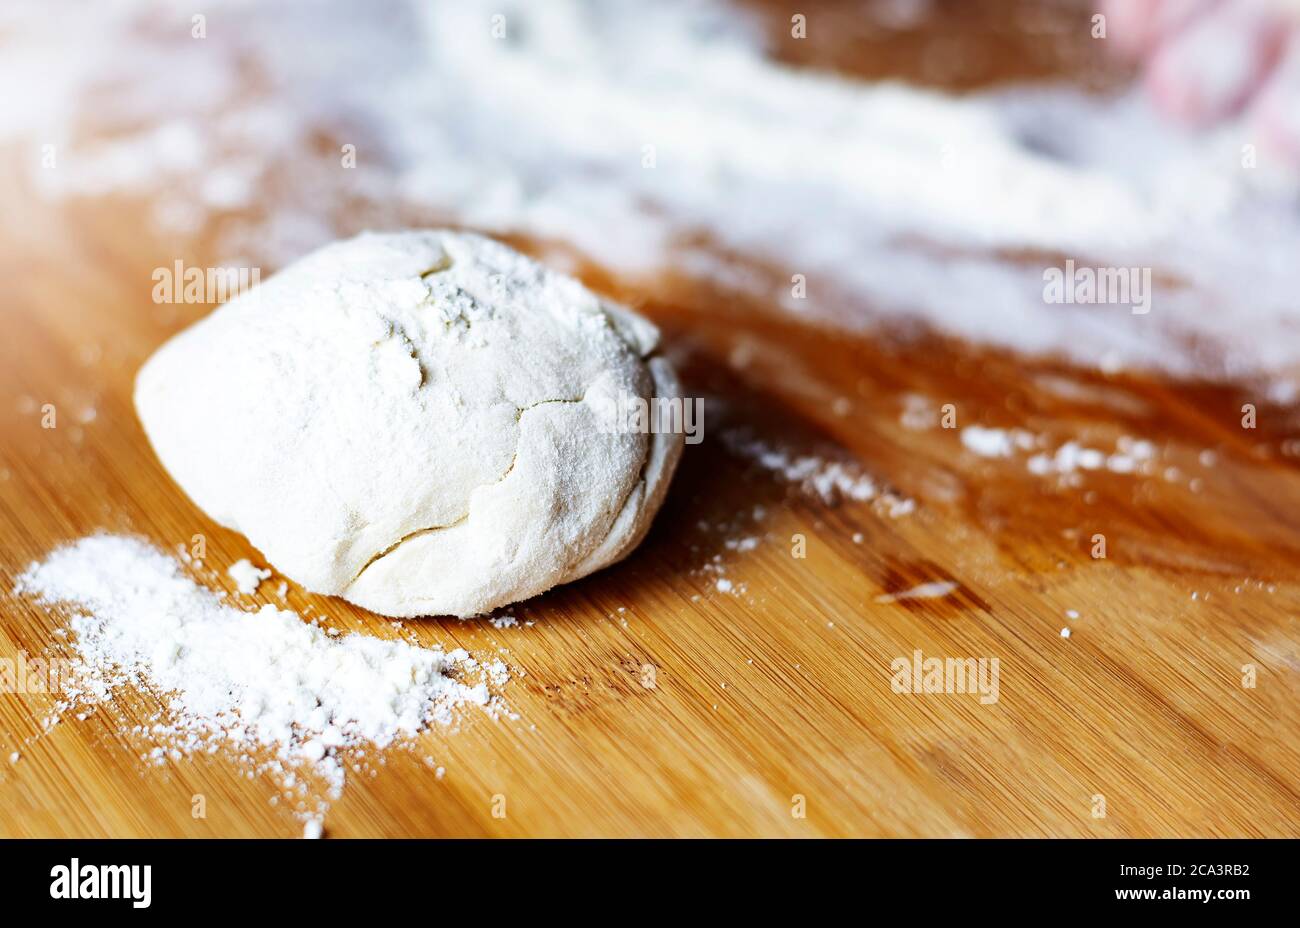 a fresh dough on a floured wooden board. Preparation and ingredients for pizza, bread and pasta. Raw food Stock Photo